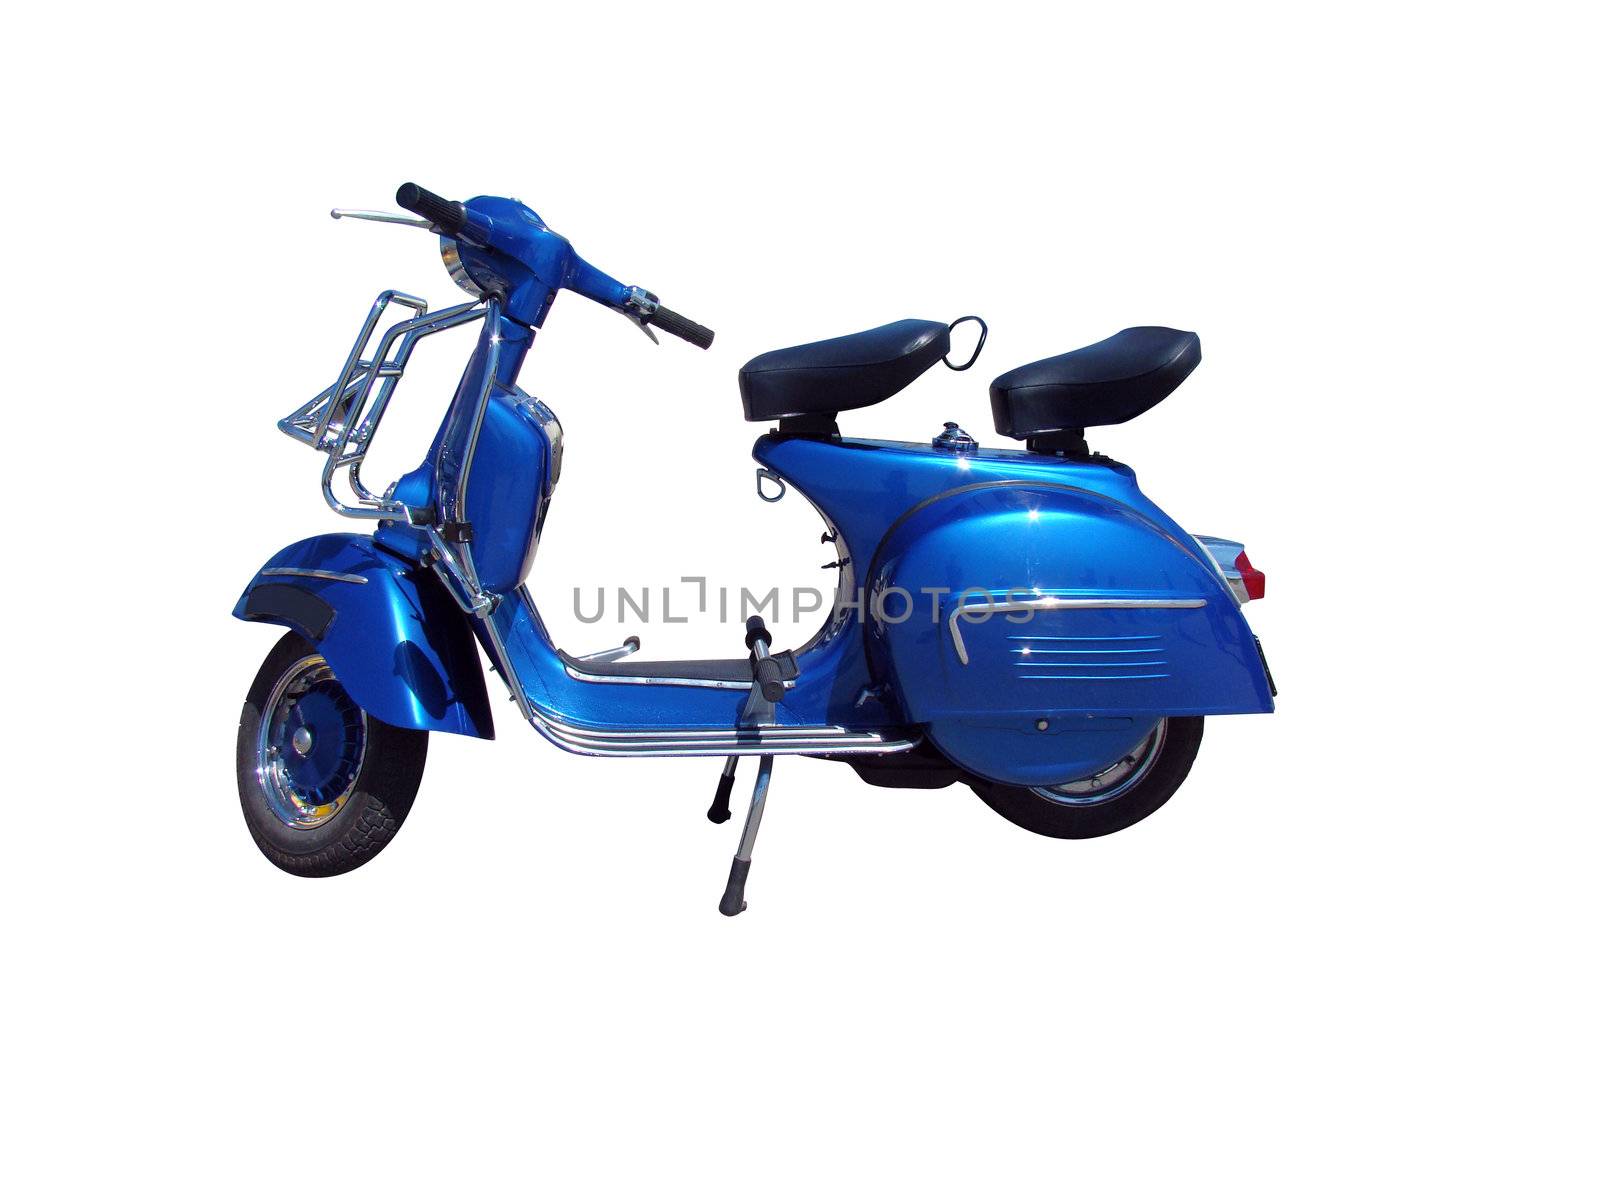 Vintage blue scooter (path included) by simas2